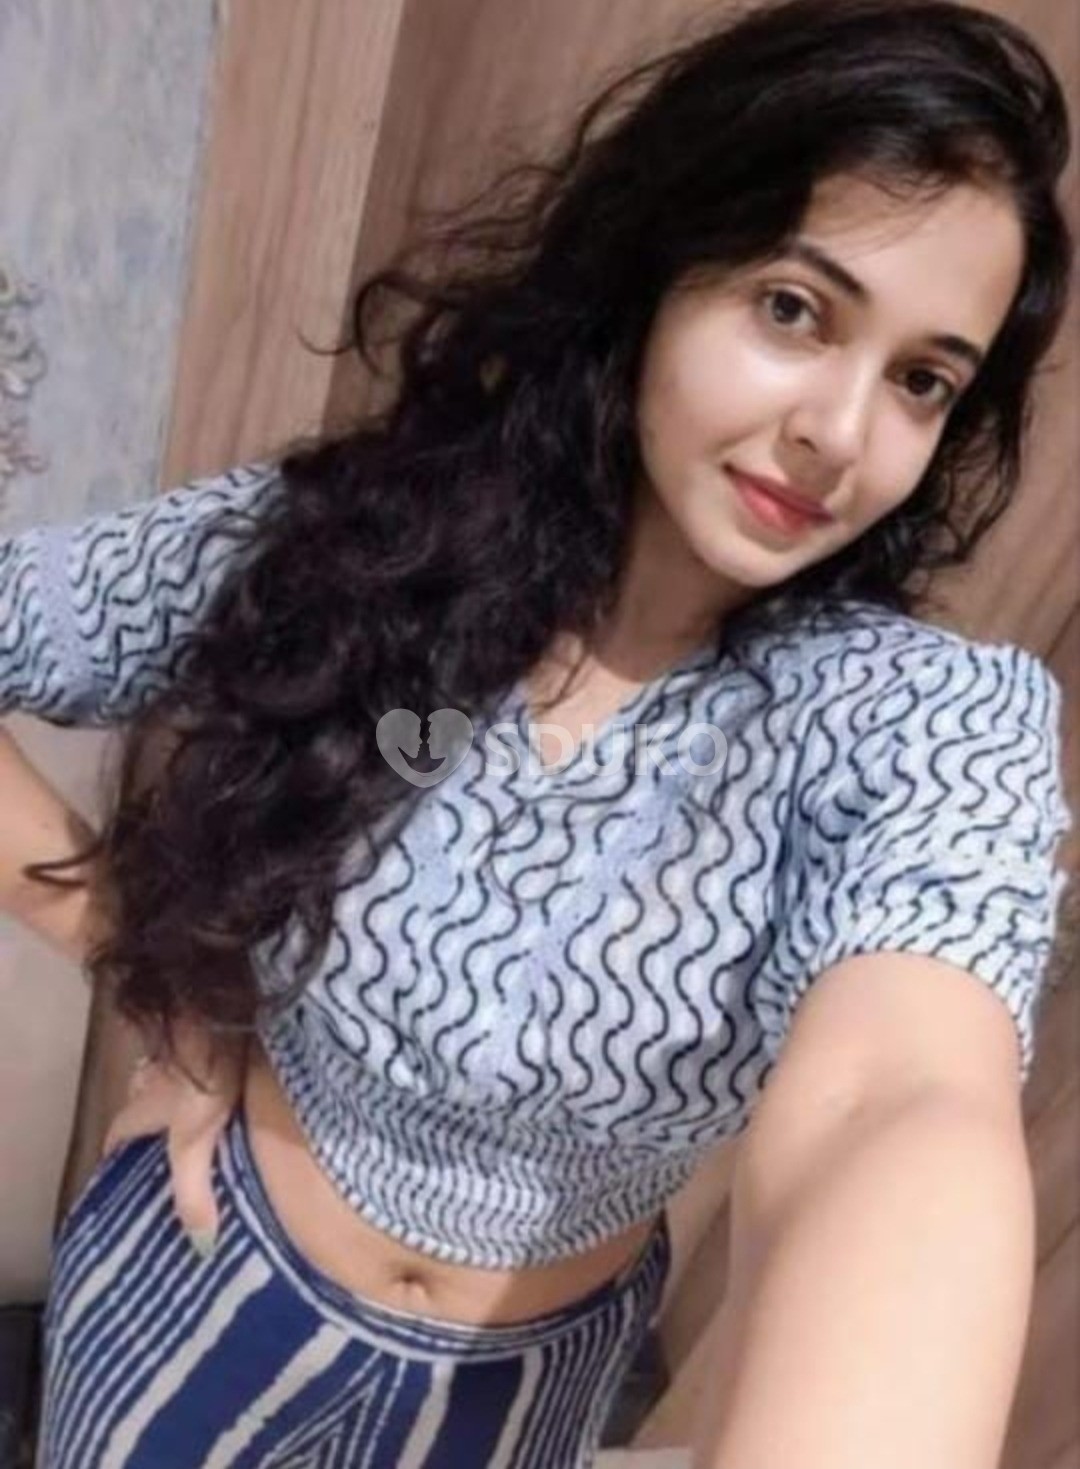 Dharmatala LOW PRICE🔸k ✅( 24×7 ) SERVICE A AVAILABLE 100% SAFE AND S SECURE UNLIMITED ENJOY HOT COLLEGE GIRL HOUSE